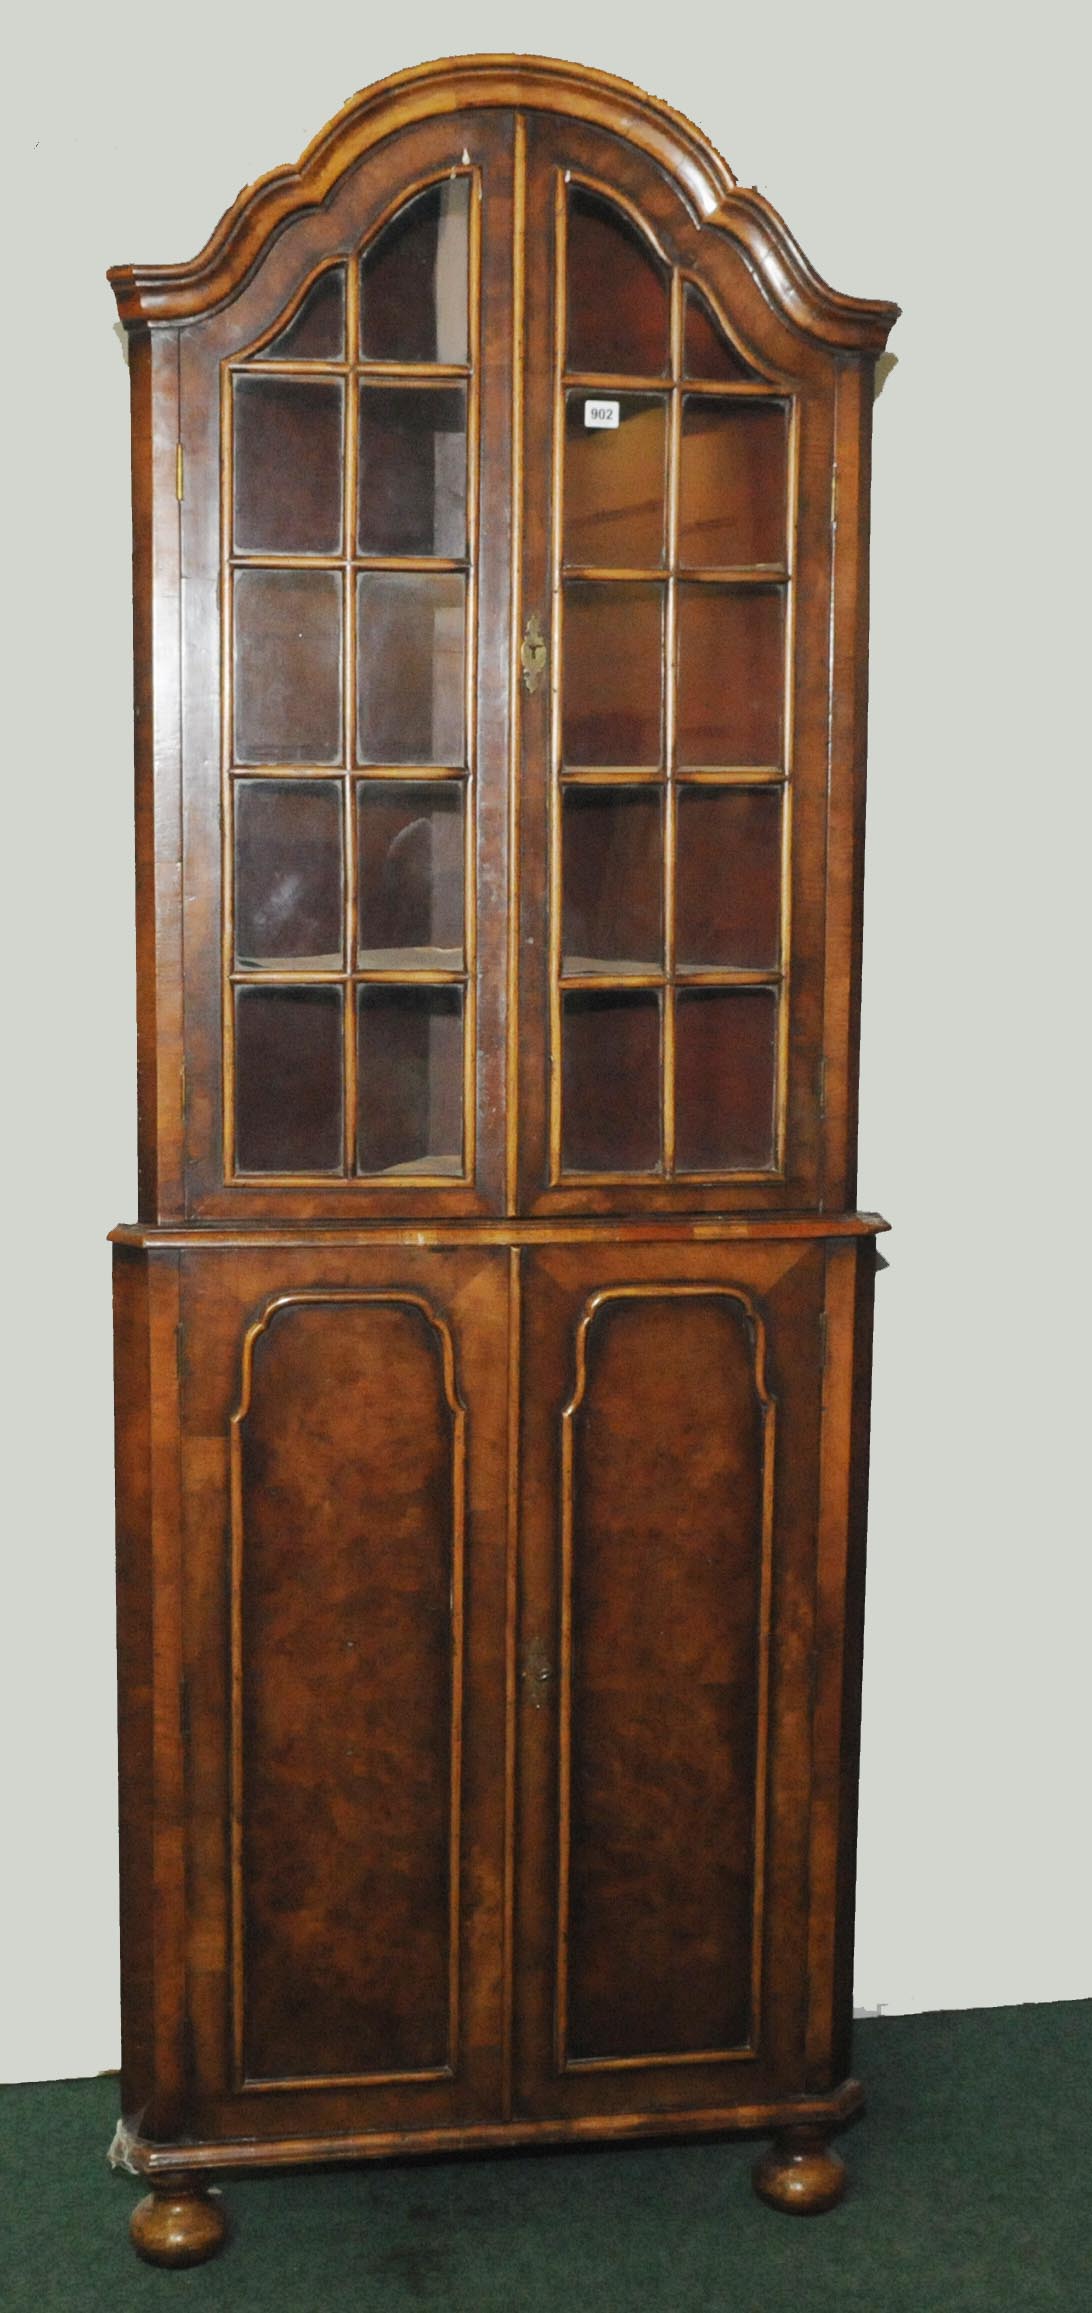 Late 19th century walnut standing corner cabinet with scrolling domed pediment above pair of multi